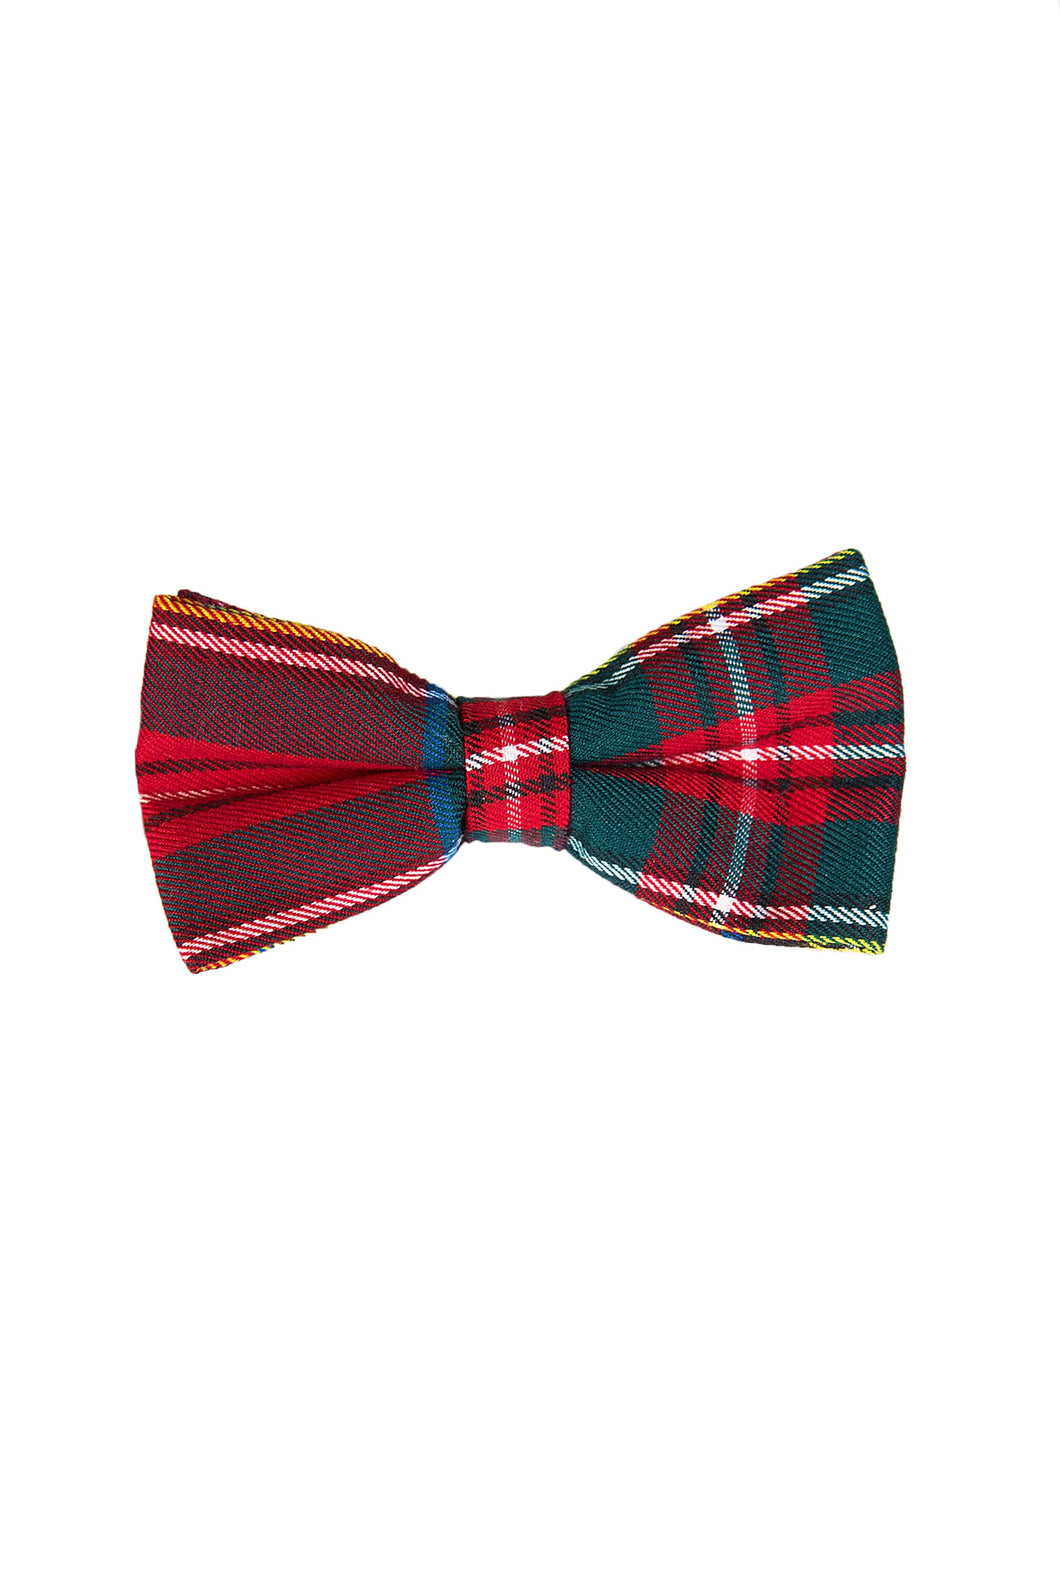 The Rockefeller | Red and Green Plaid Bow Tie